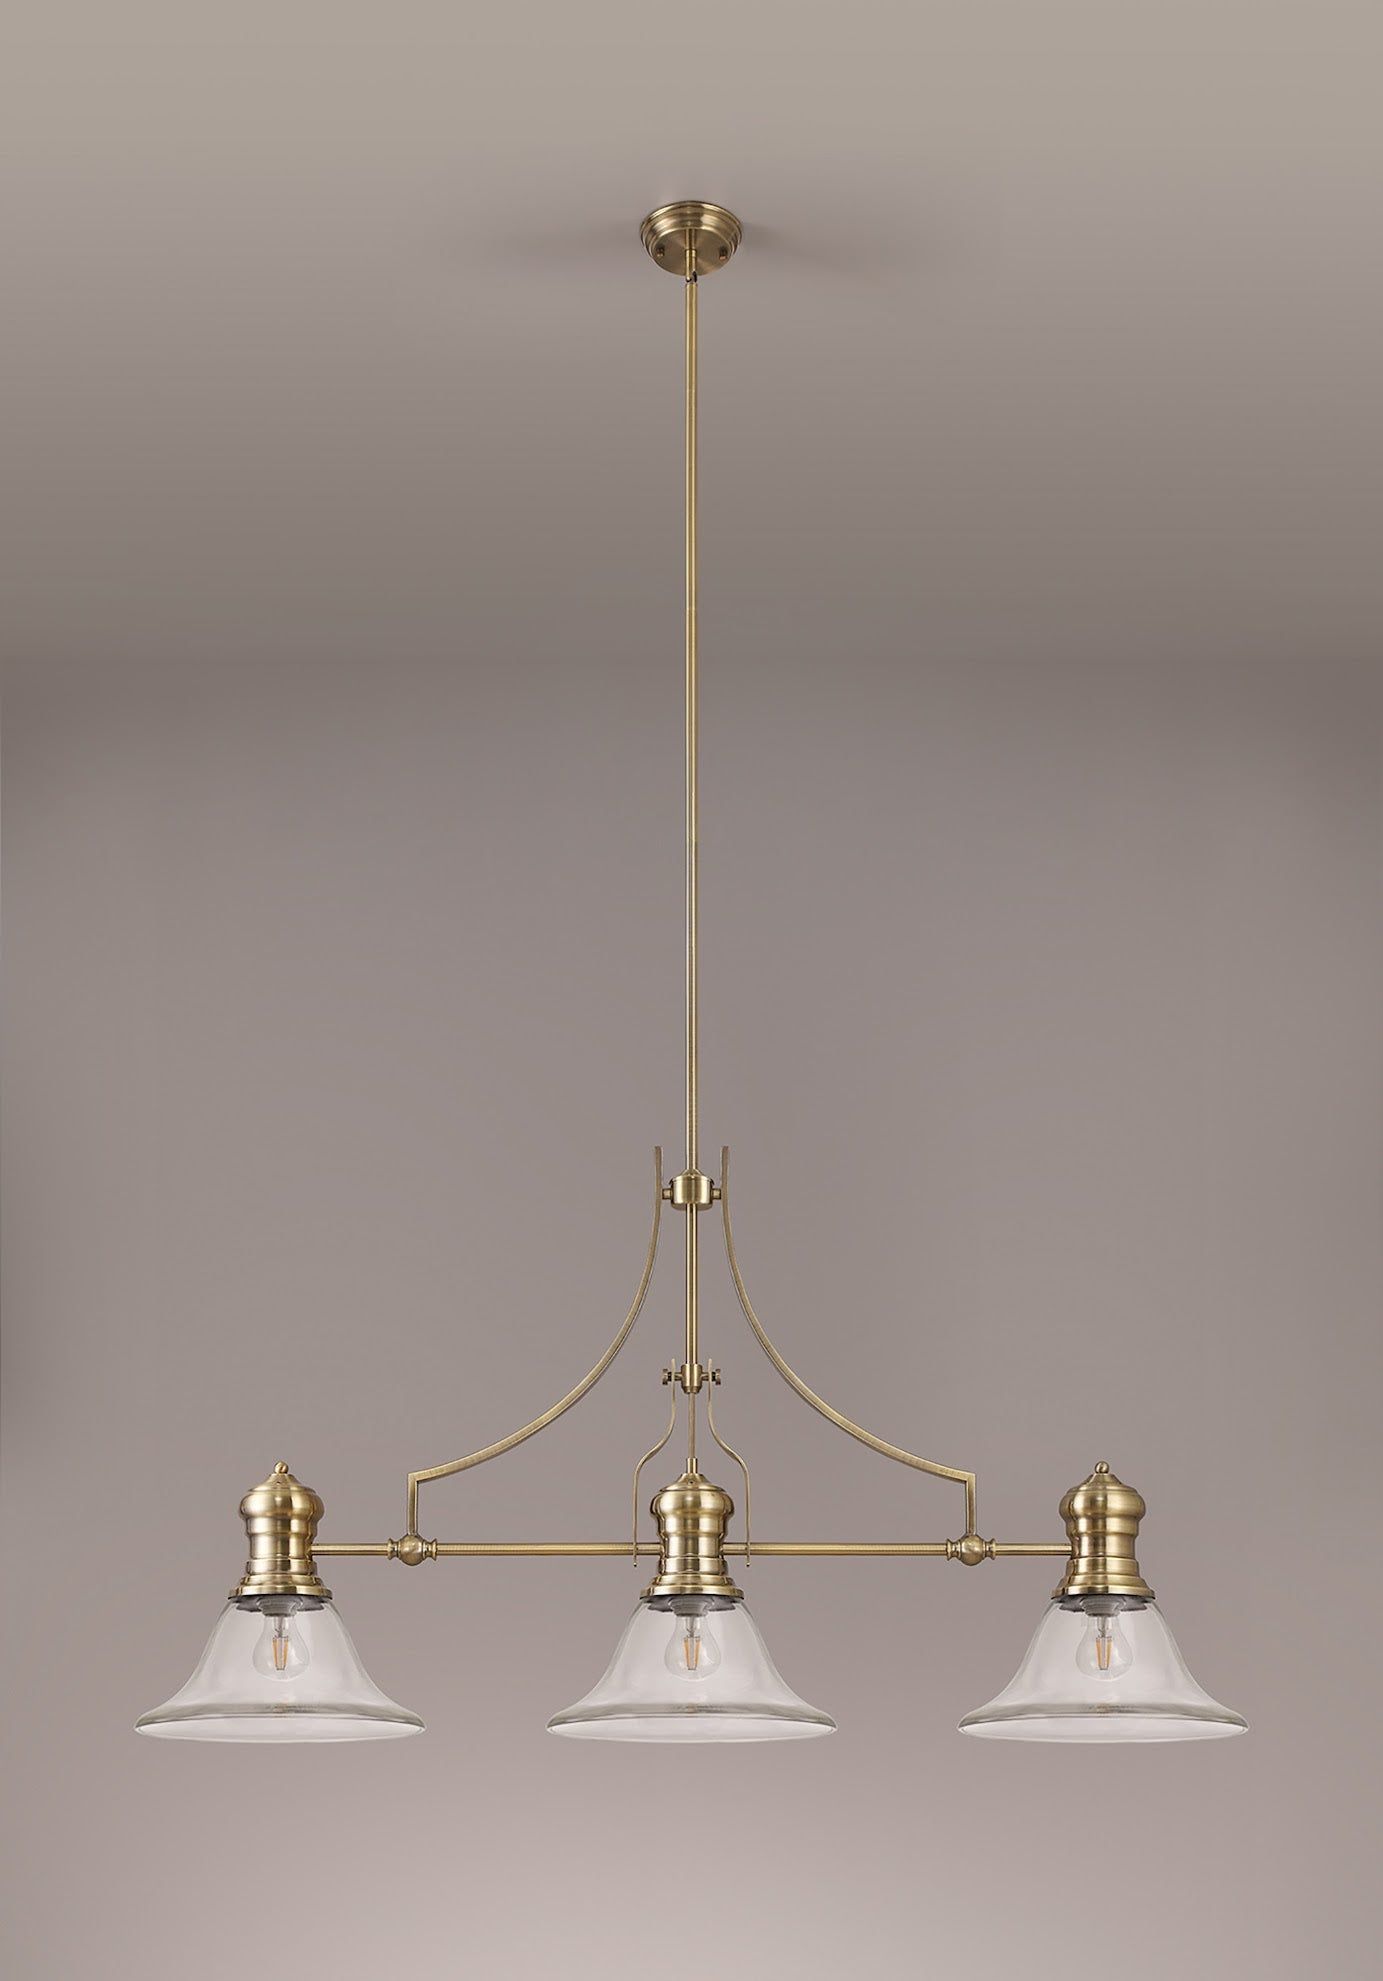 Savannah 3 Light Linear Pendant E27 With 30cm Smooth Bell Glass Shade, Antique Brass, Clear